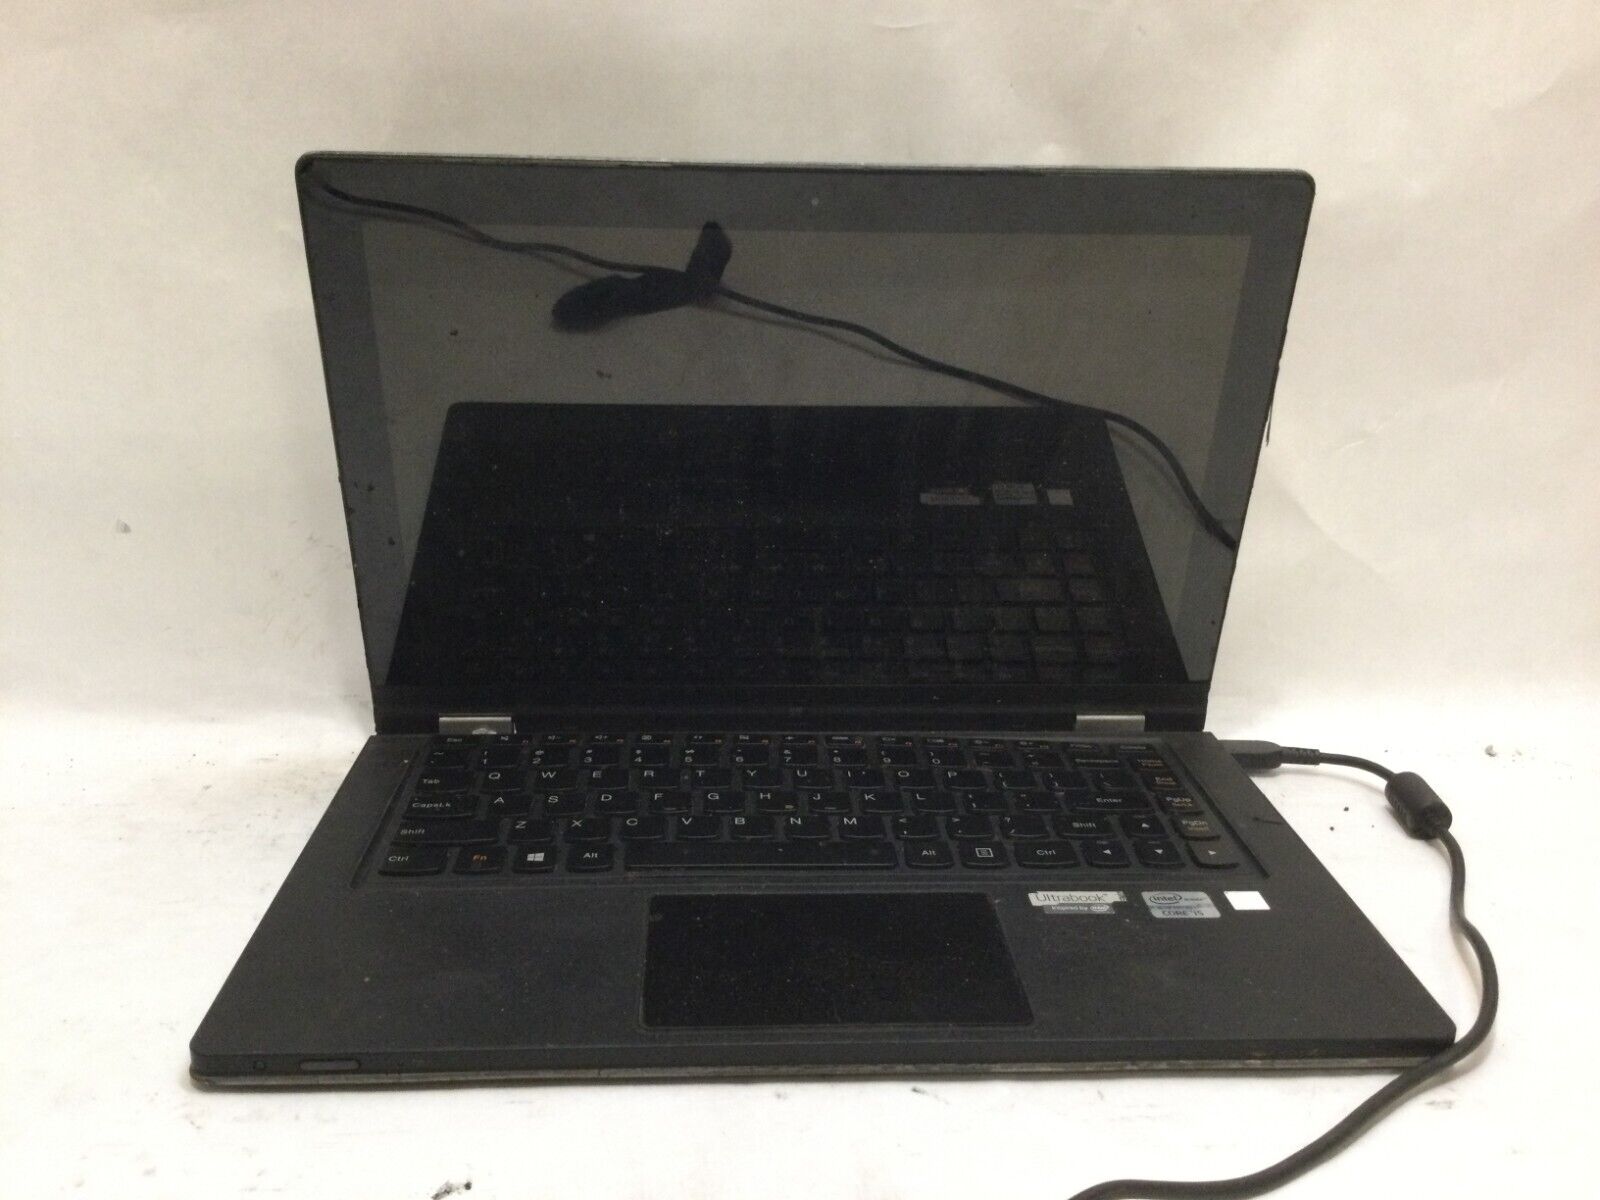 Lenovo IdeaPad Yoga 13 / Intel Core i5 UNKNOWN SPECS / (DOES NOT POWER ON) MR